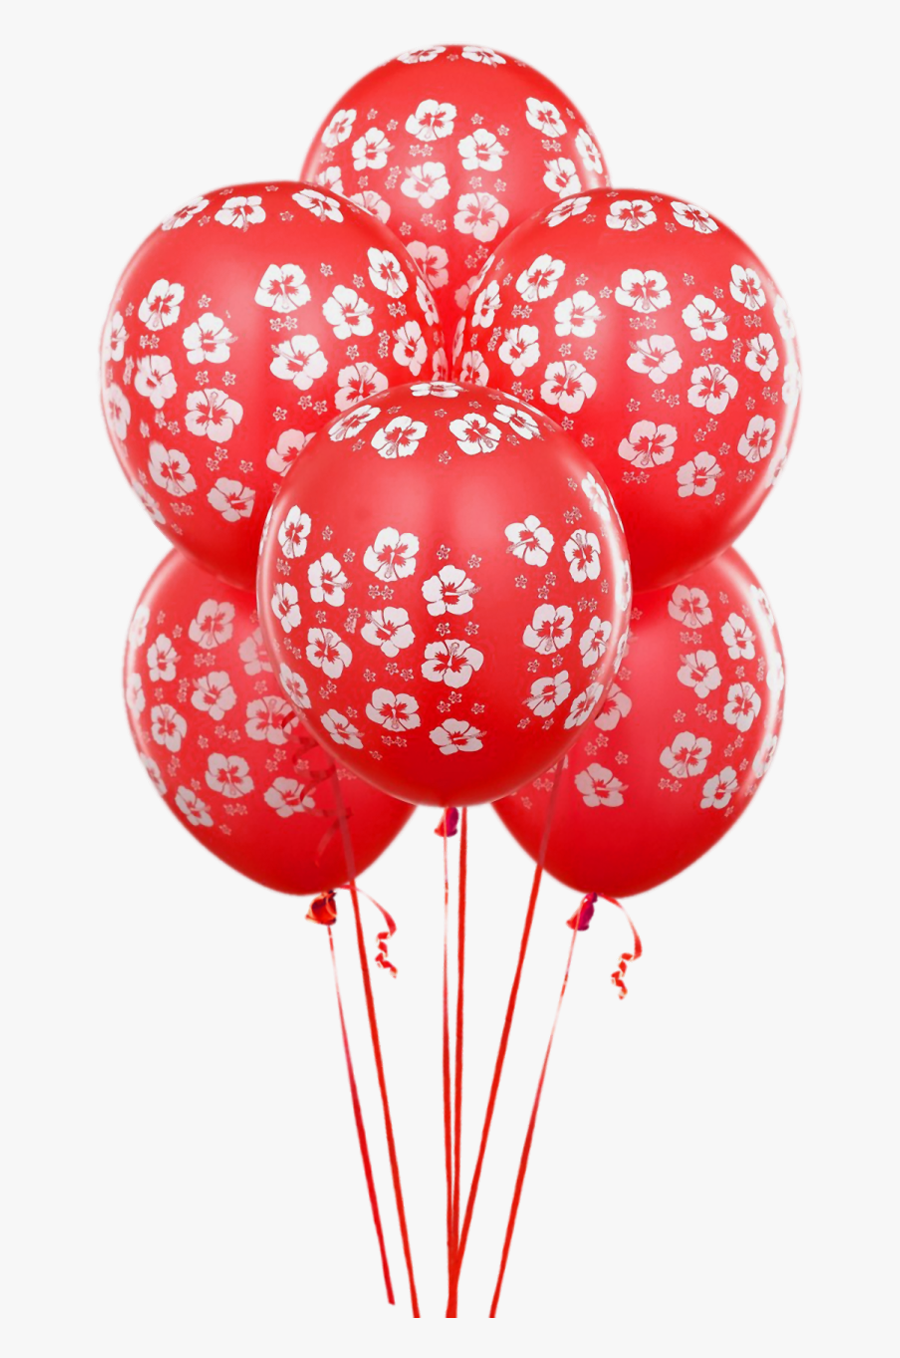 Red Birthday Balloons Png, Transparent Clipart